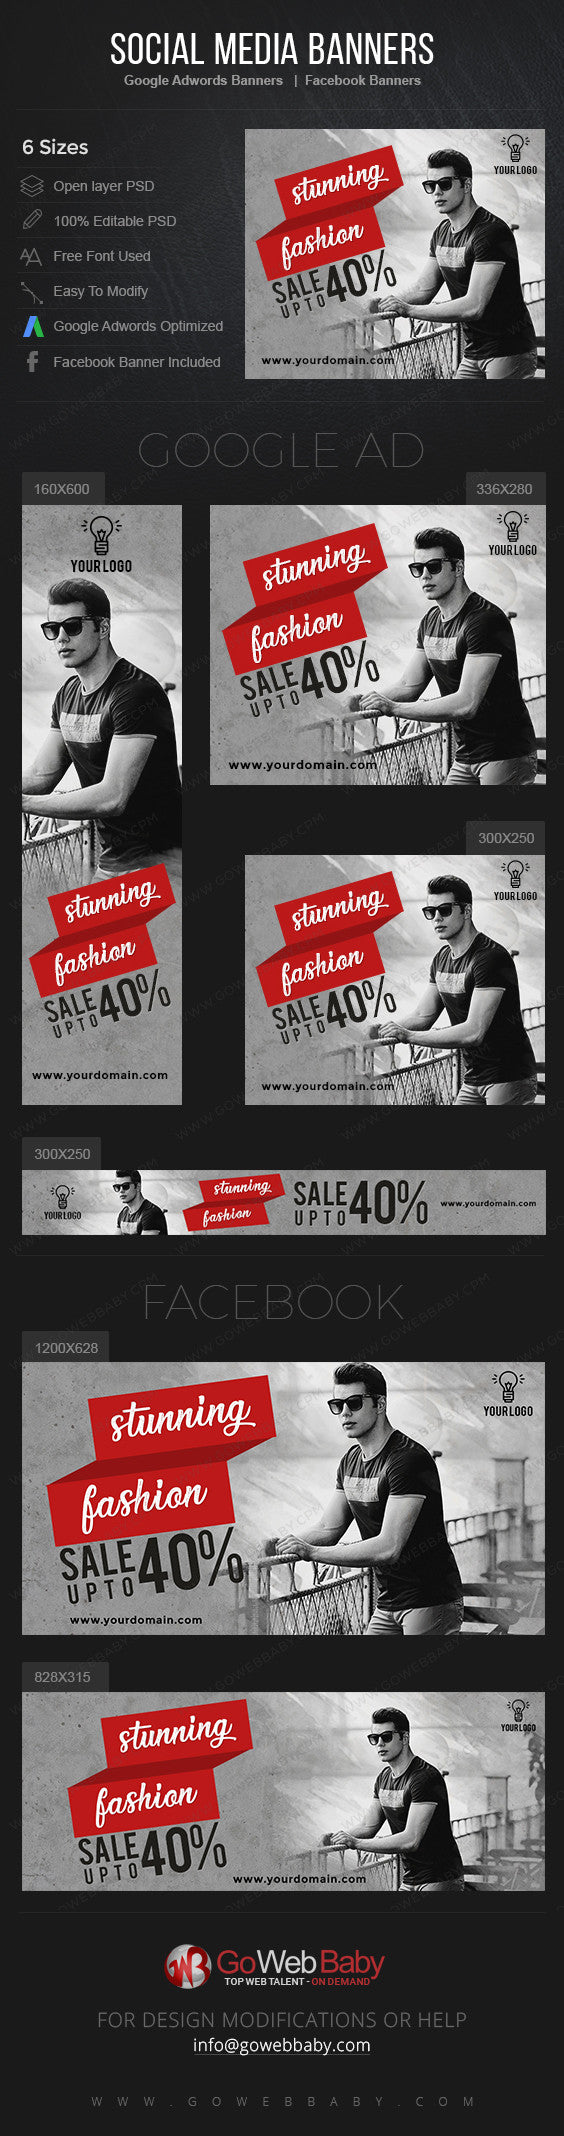 Google Adwords Display Banner with Facebook banners -Stunning Fashion for Men for Website Marketing - GoWebBaby.Com